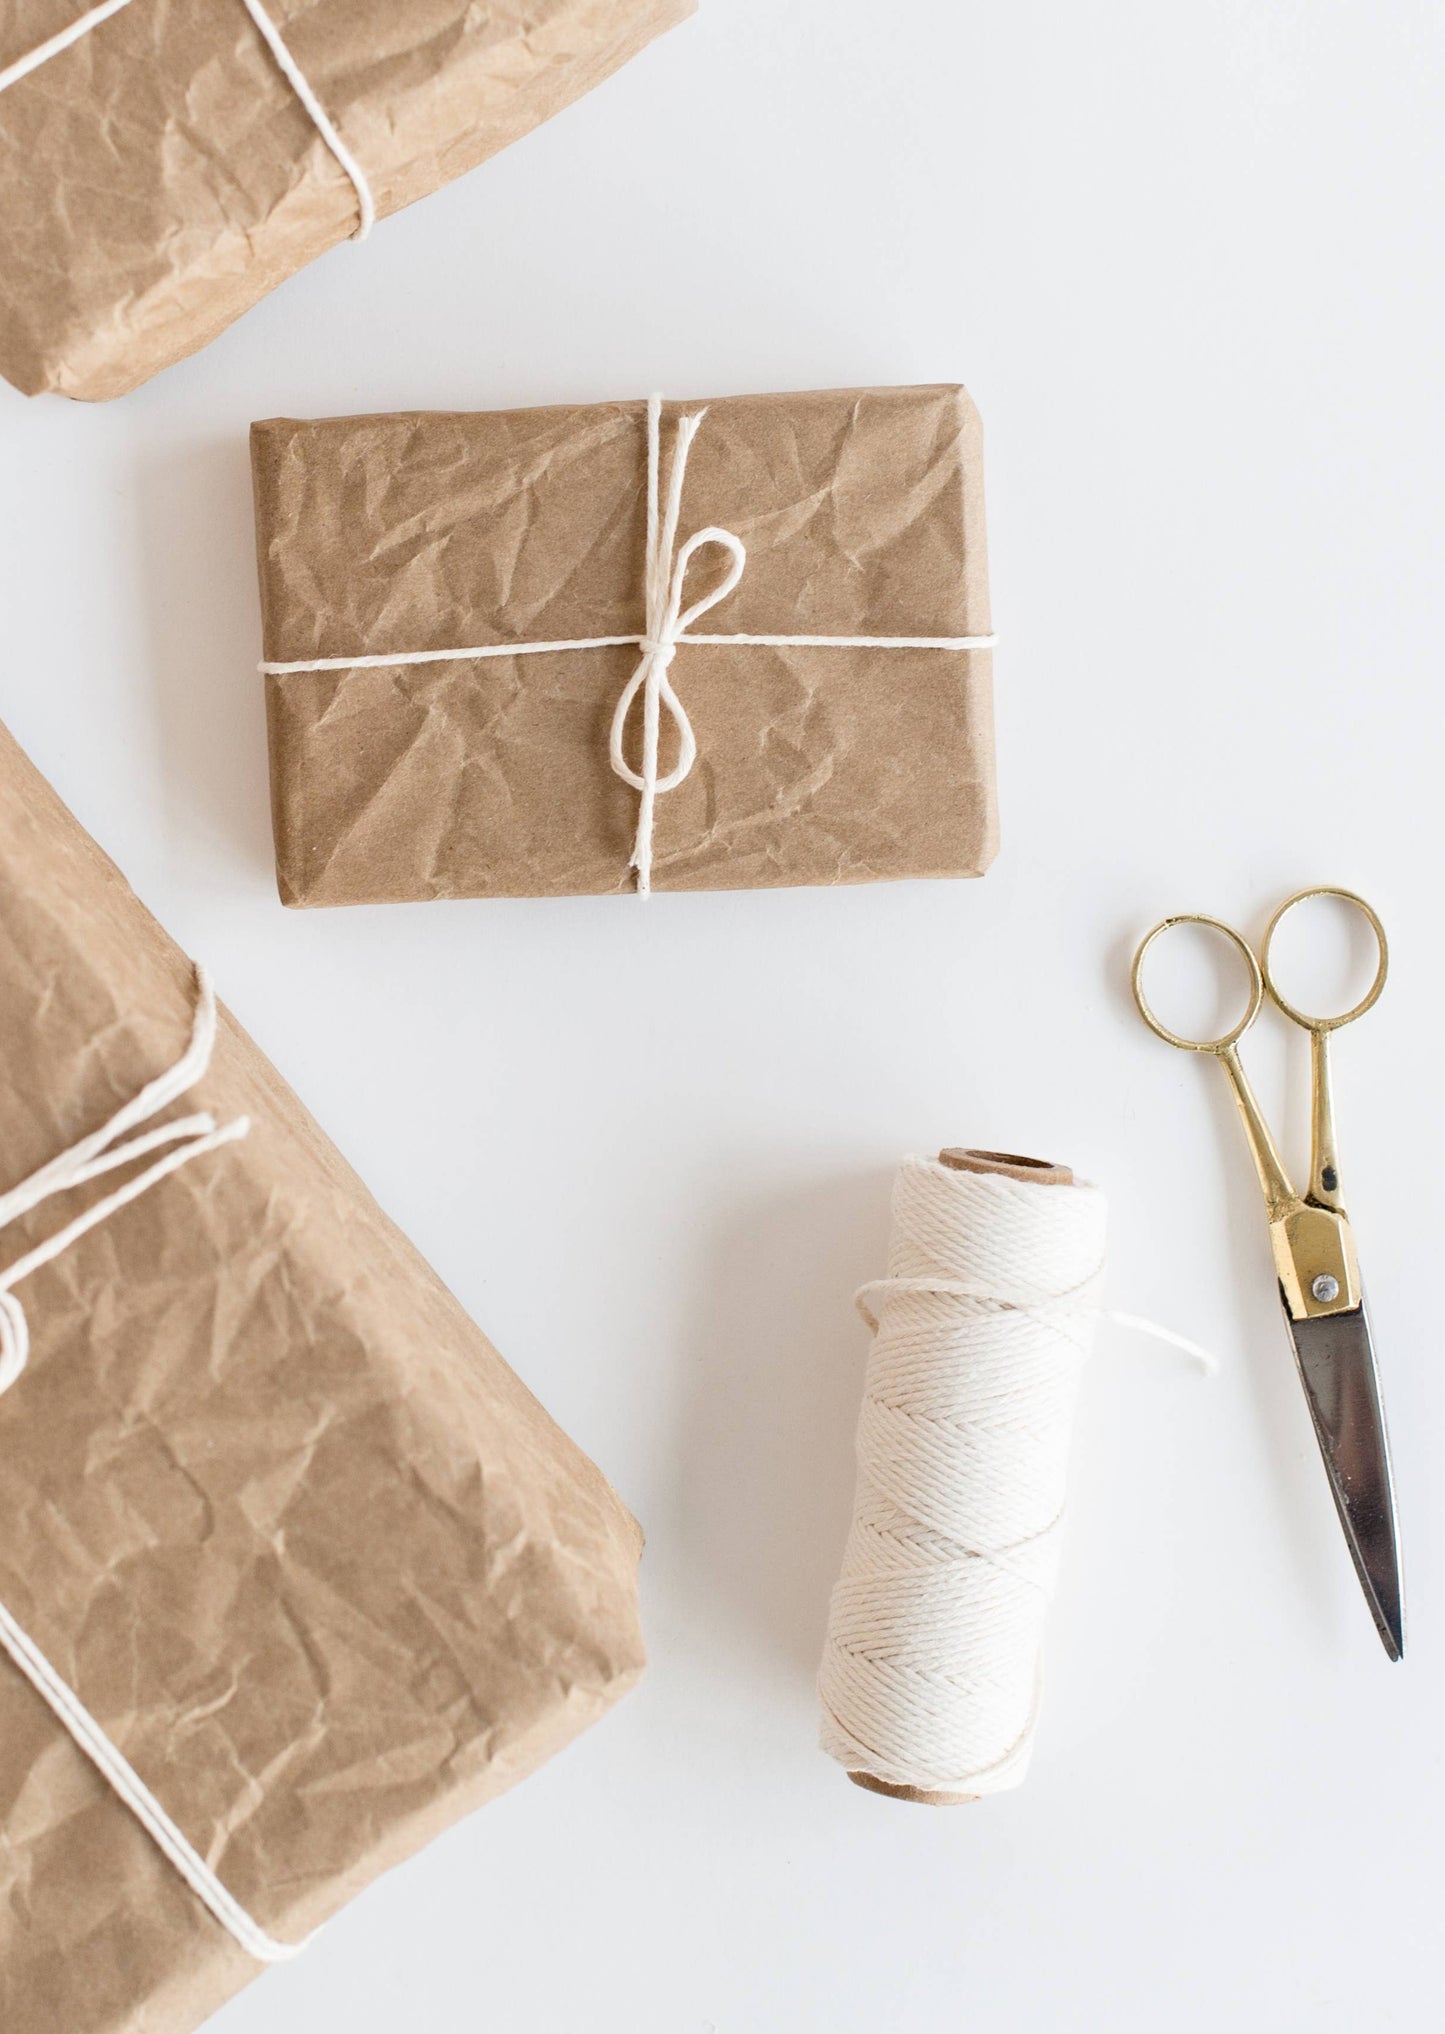 Recycled Kraft Wrapping Paper Roll